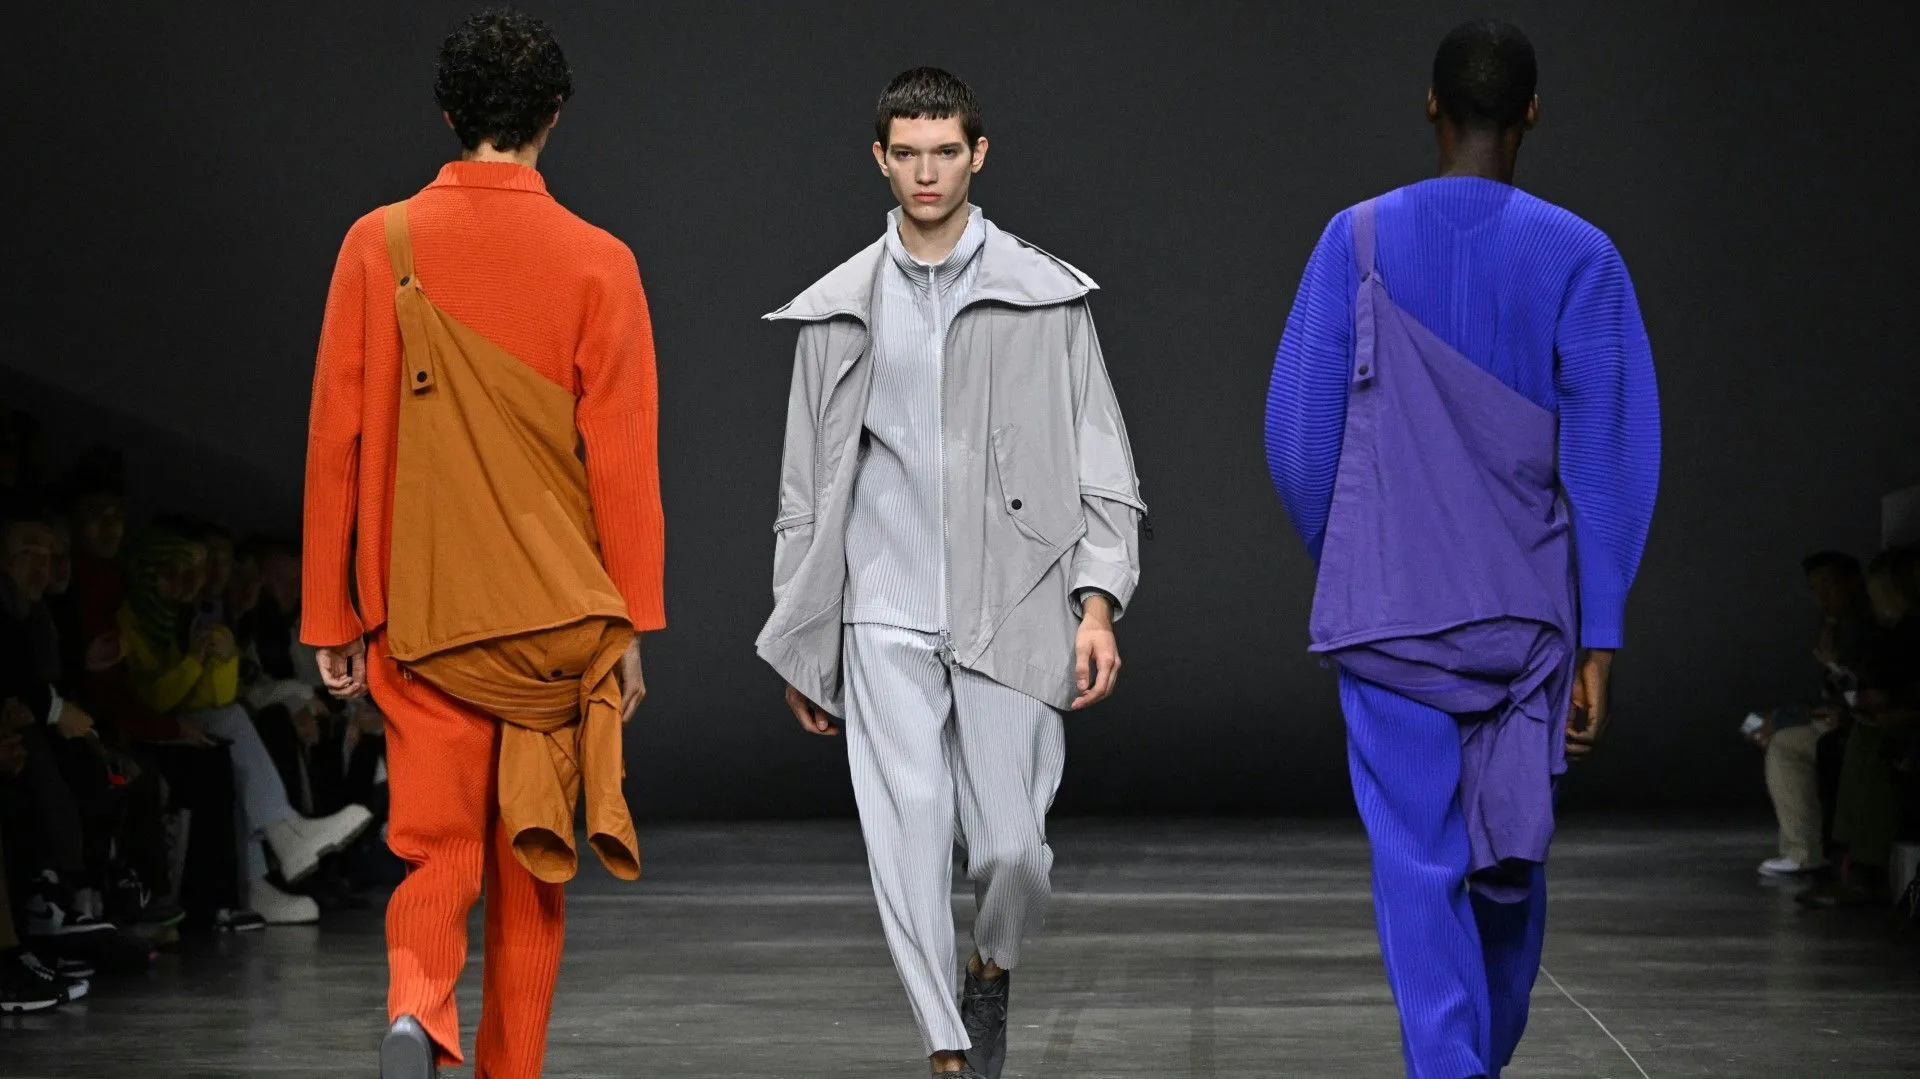 Fashion week in Paris: Issey Miyake shows colorful simplicity